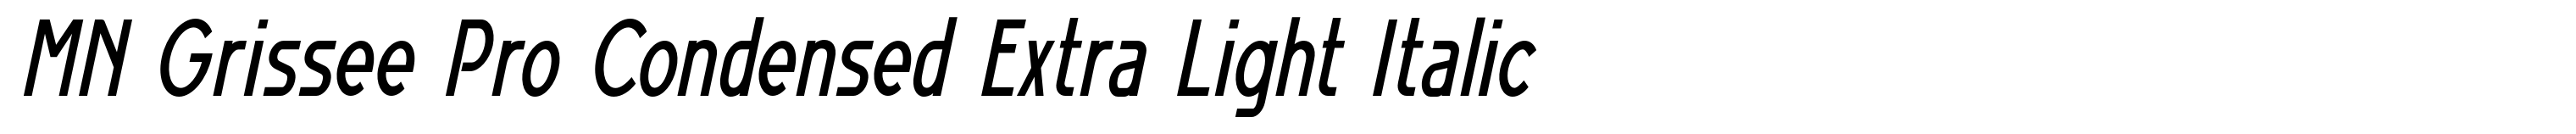 MN Grissee Pro Condensed Extra Light Italic